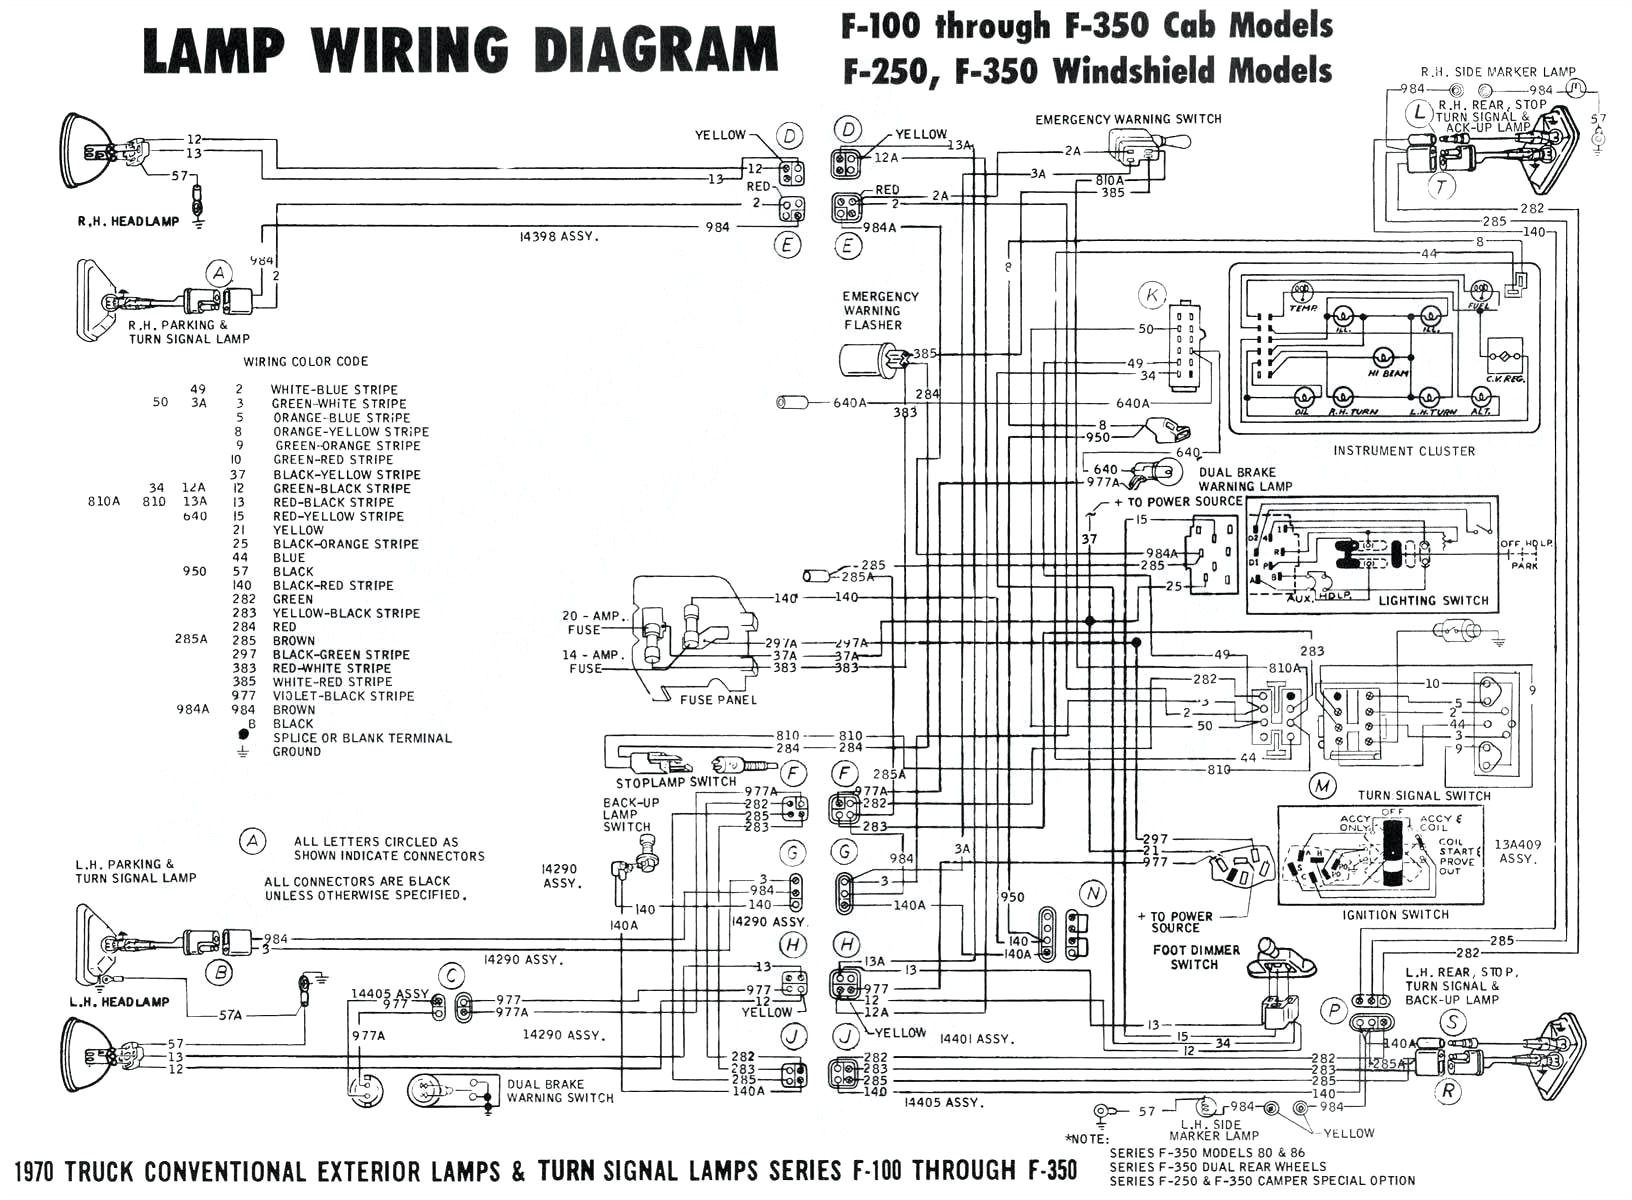 Ford Ignition Switch Wiring Diagram 1951 ford Ignition Switch Wiring Wiring Diagram Blog